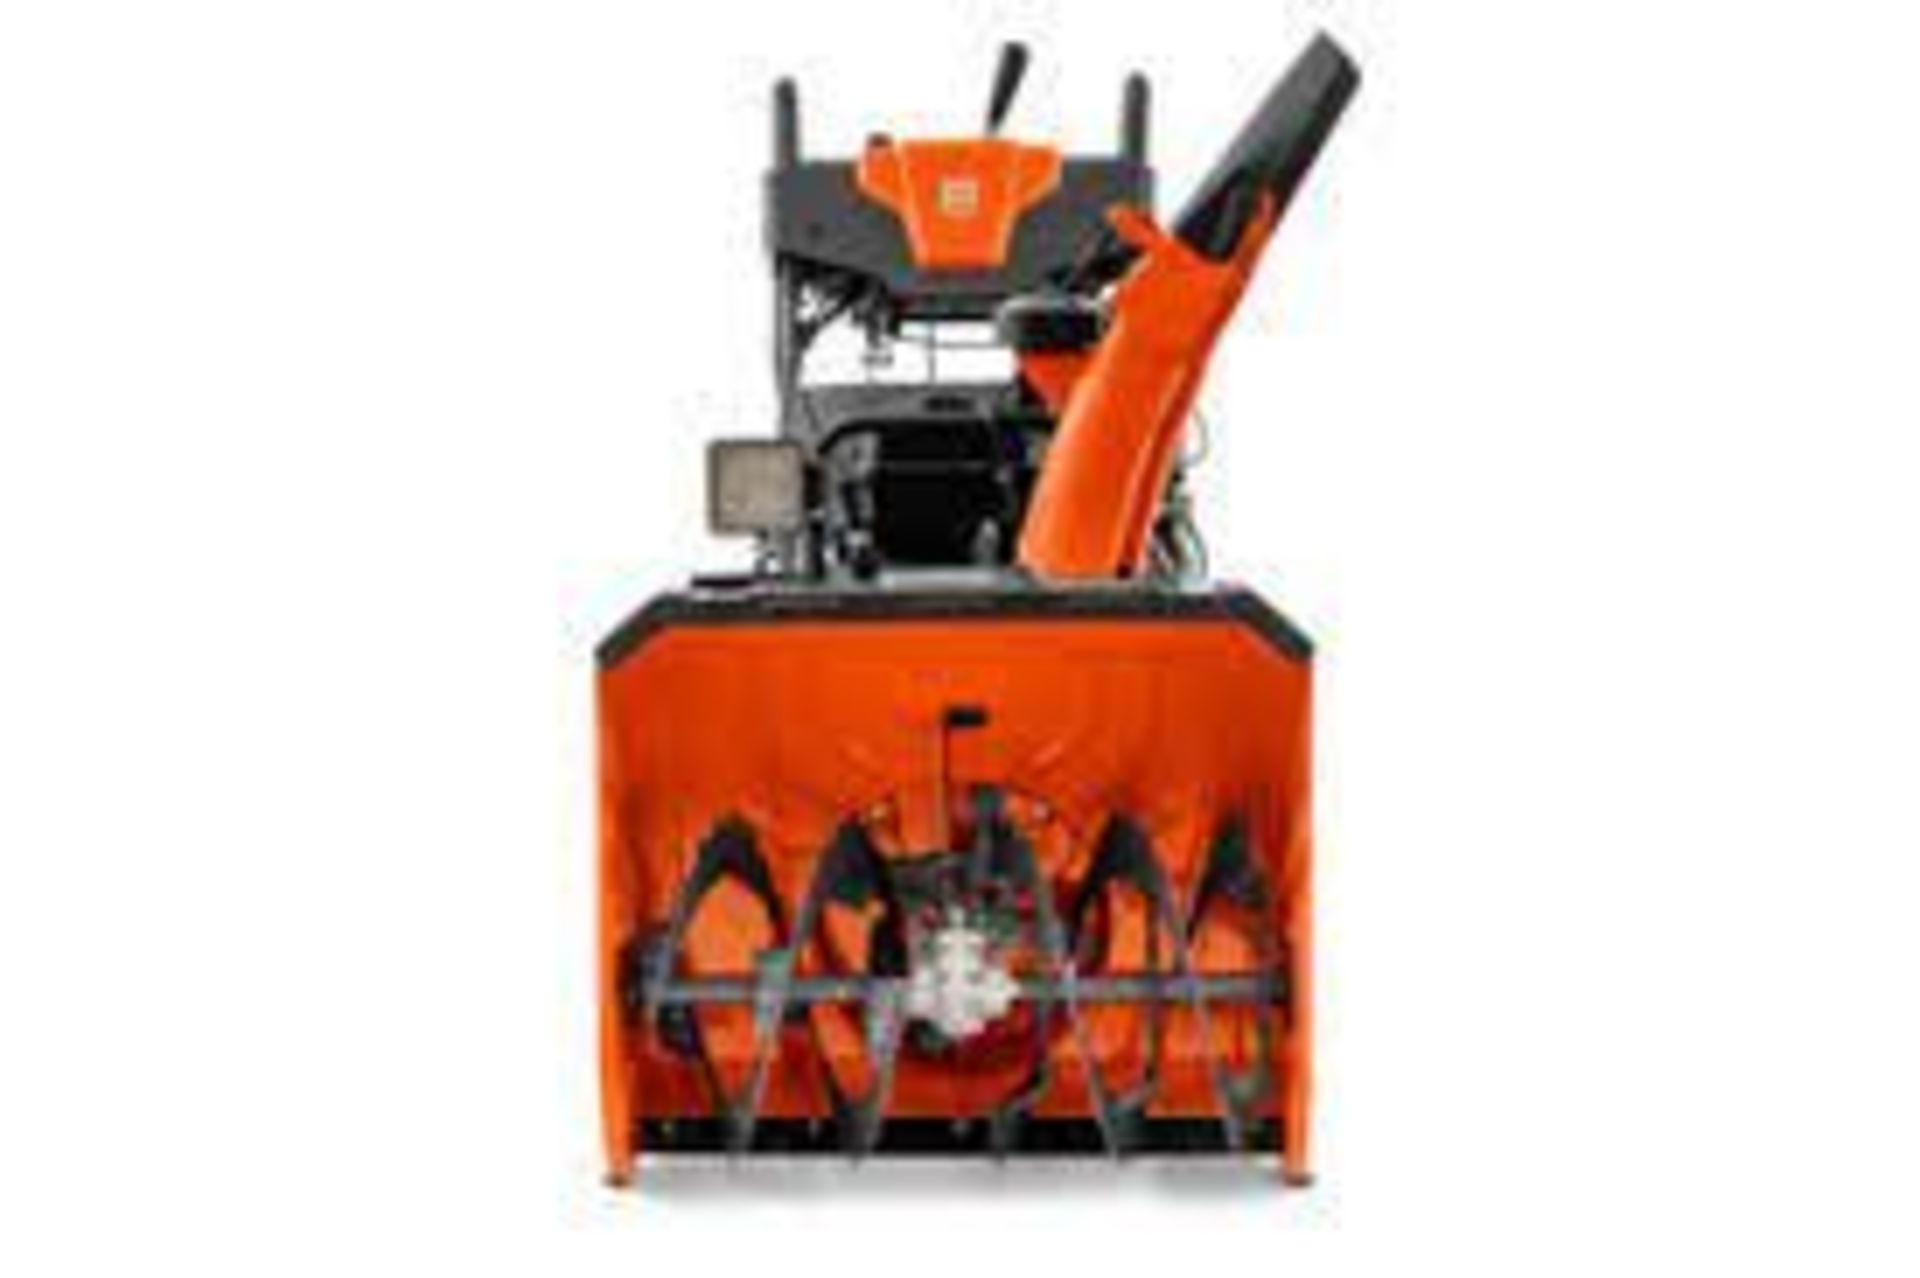 Husqvarna ST 427 Self Propelled Snow Blower - Approx. MSRP $2399 - Image 3 of 5